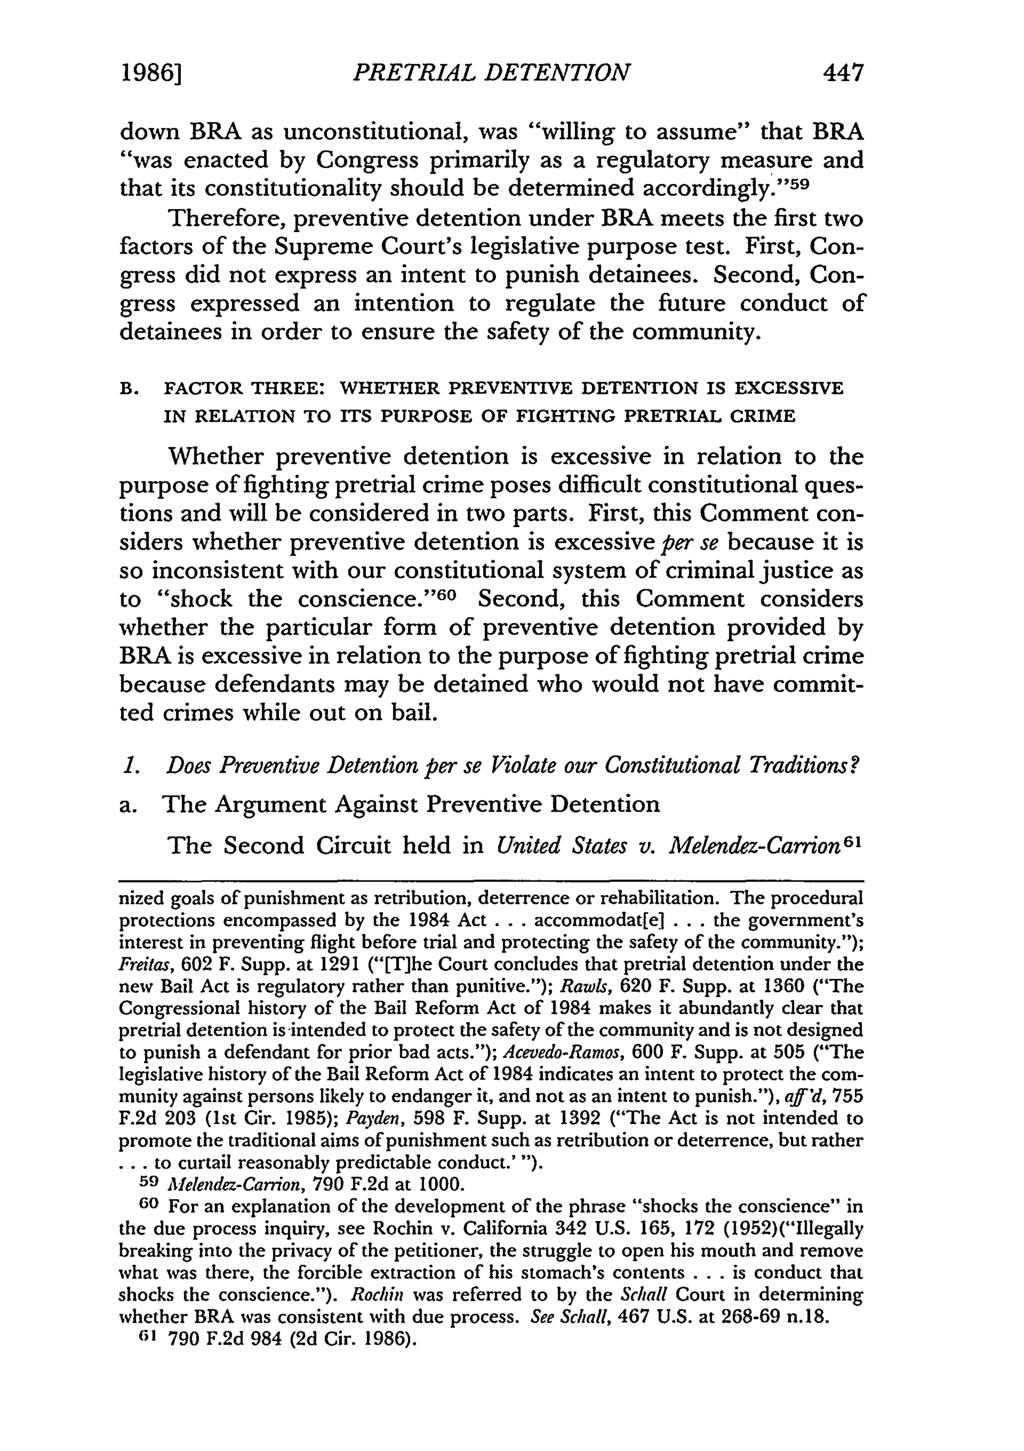 1986] PRETRIAL DETENTION 447 down BRA as unconstitutional, was "willing to assume" that BRA "was enacted by Congress primarily as a regulatory measure and that its constitutionality should be